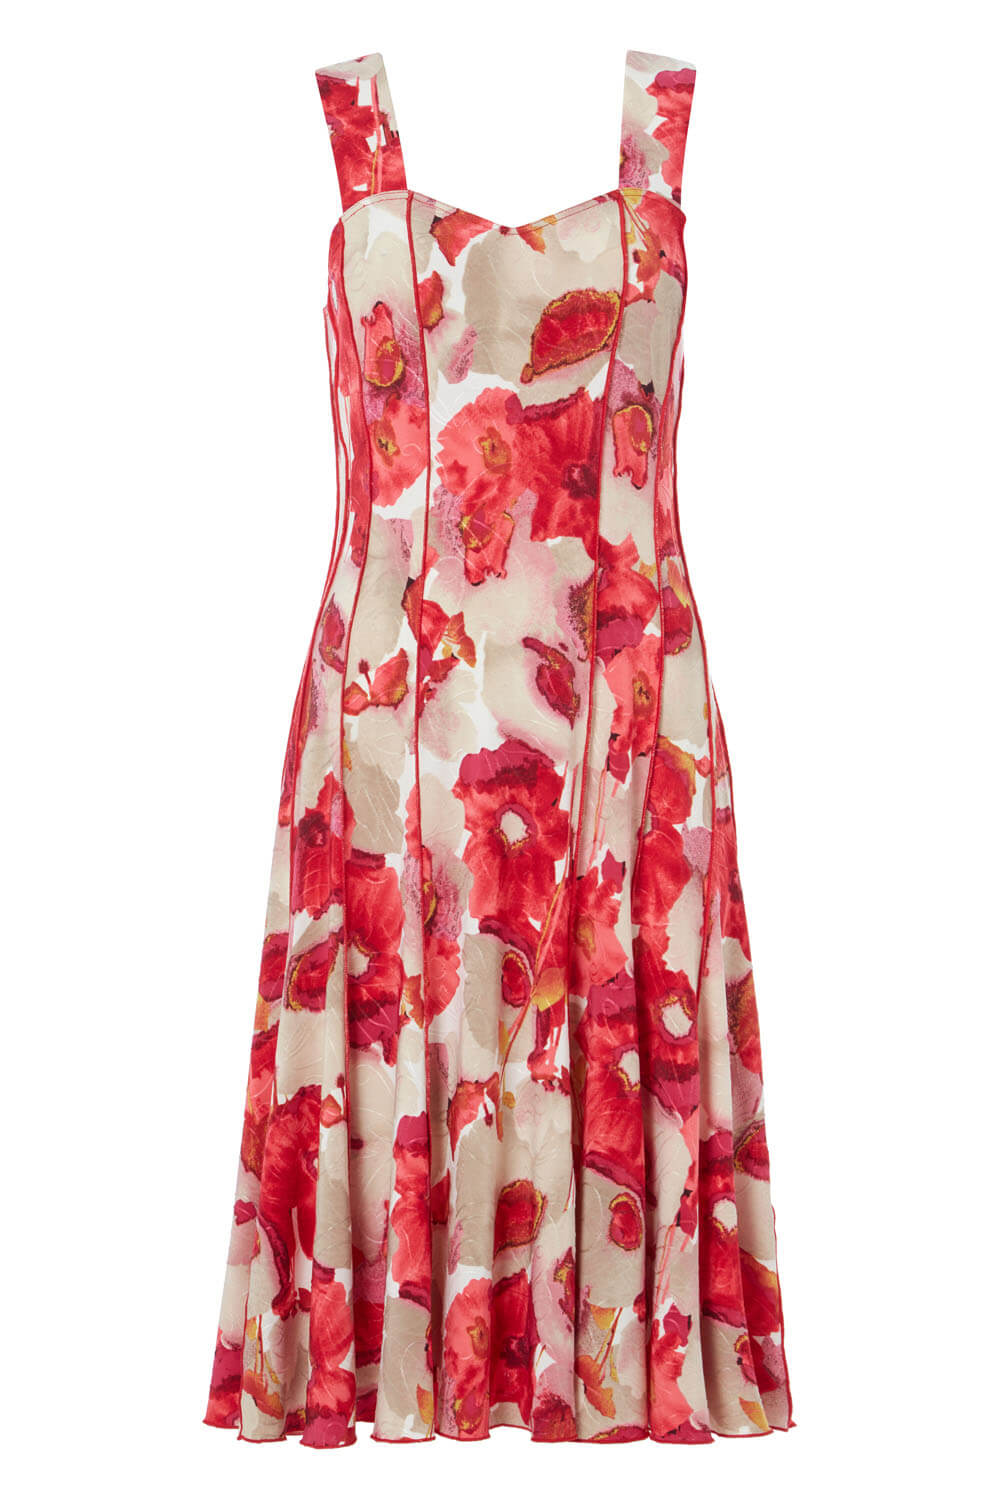 Red Floral Printed Panel Dress, Image 6 of 6